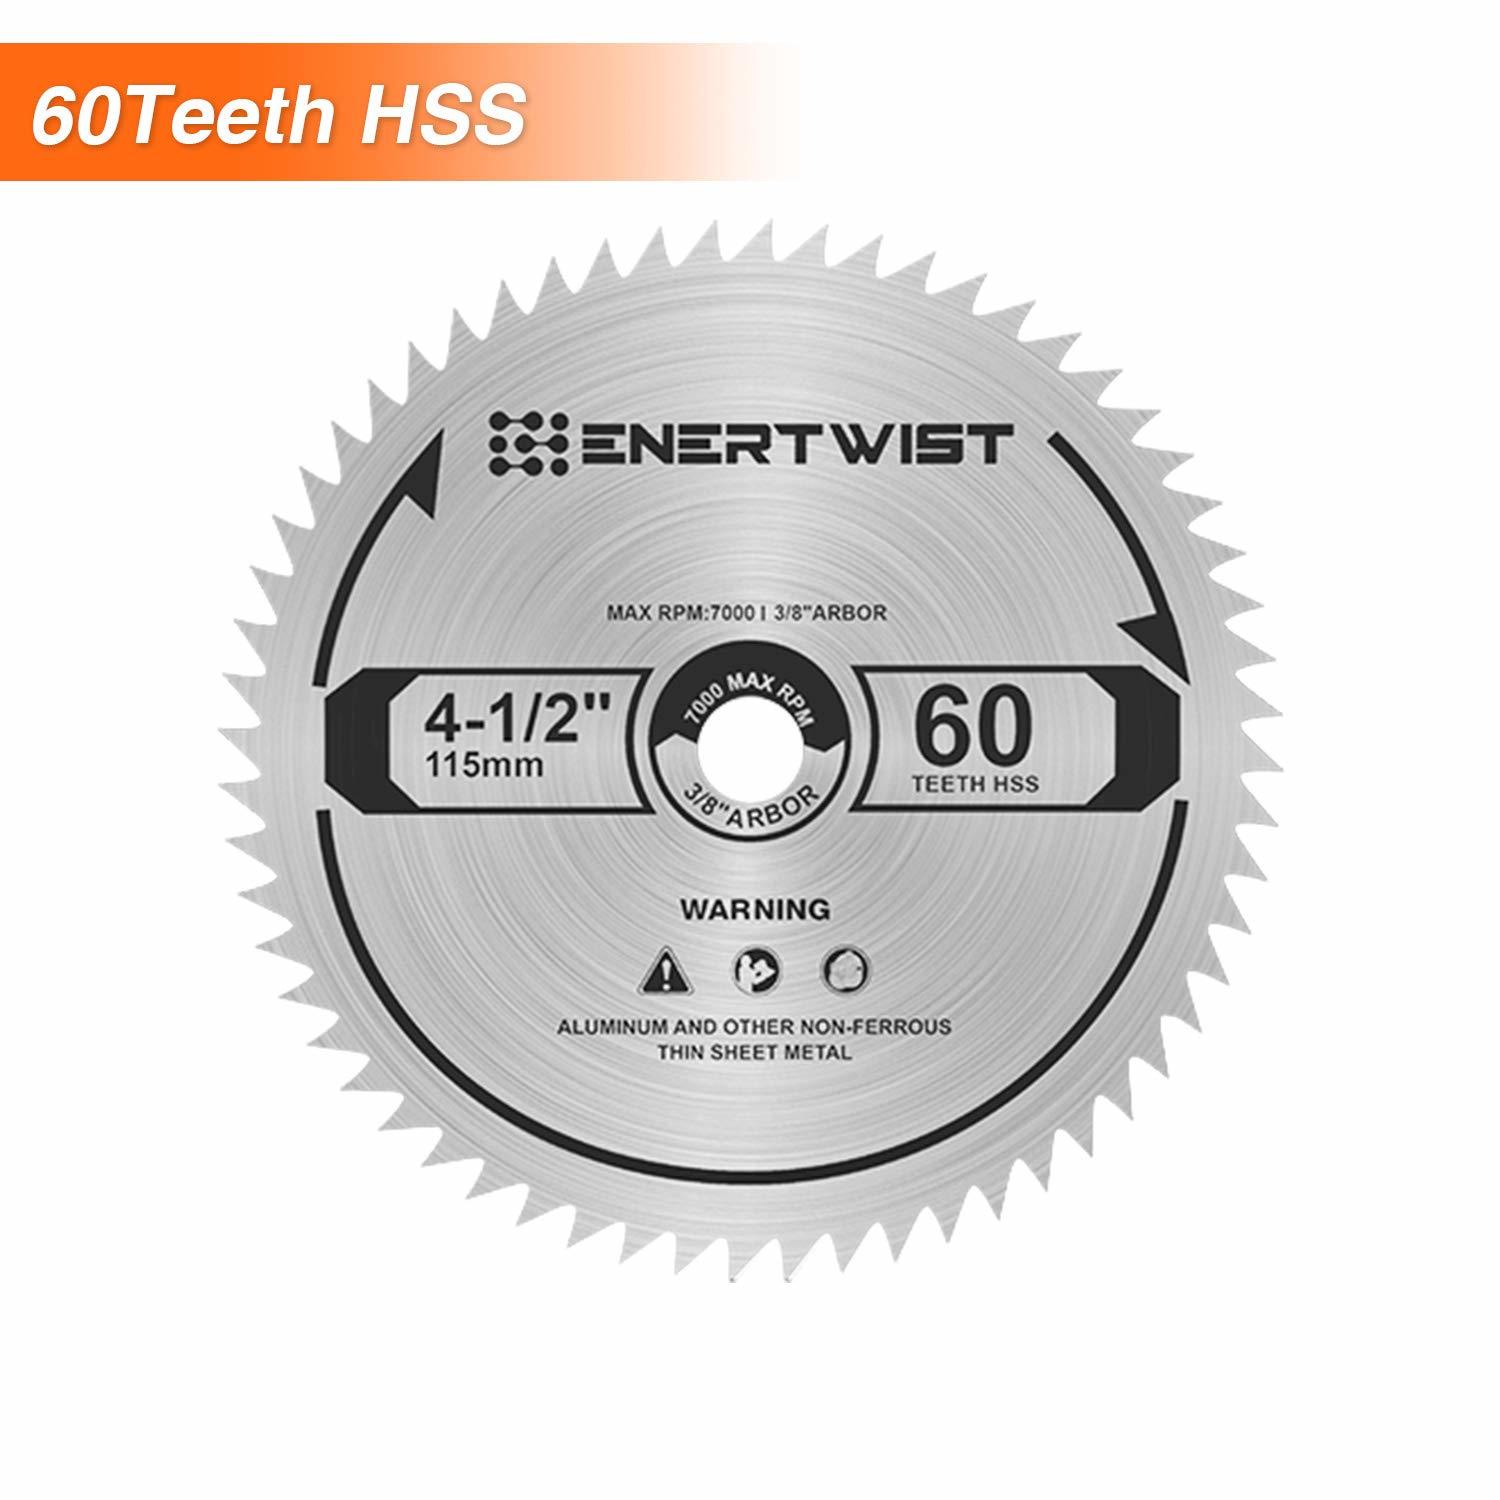 Pack Of 4 Assorted Metal/Wood 4-1/2-Inch 4.5-Inch Circular Saw Blade For  Rockwell Compact Rk3441K , WORX 